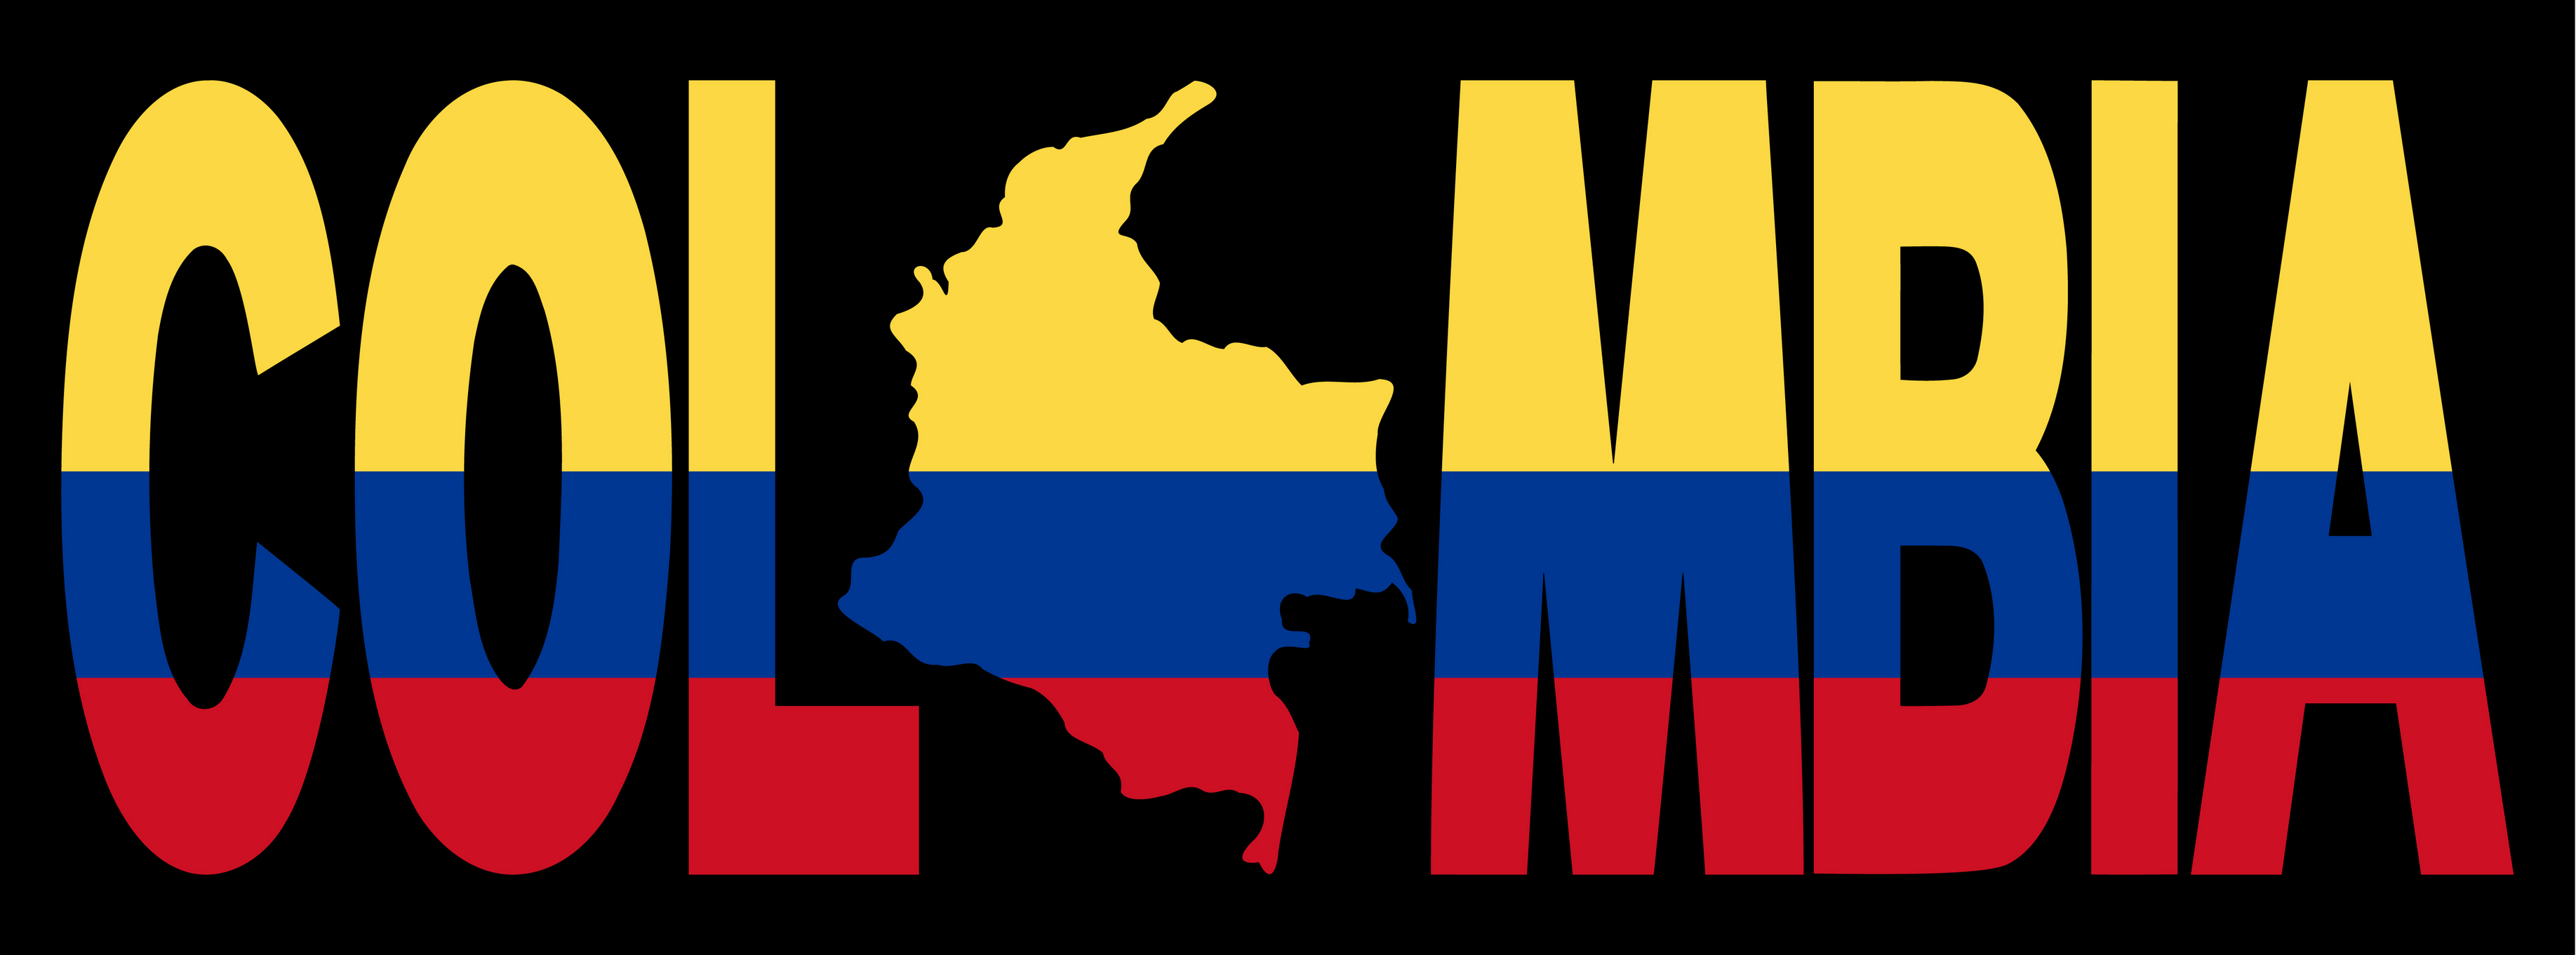 Colombia Wallpapers